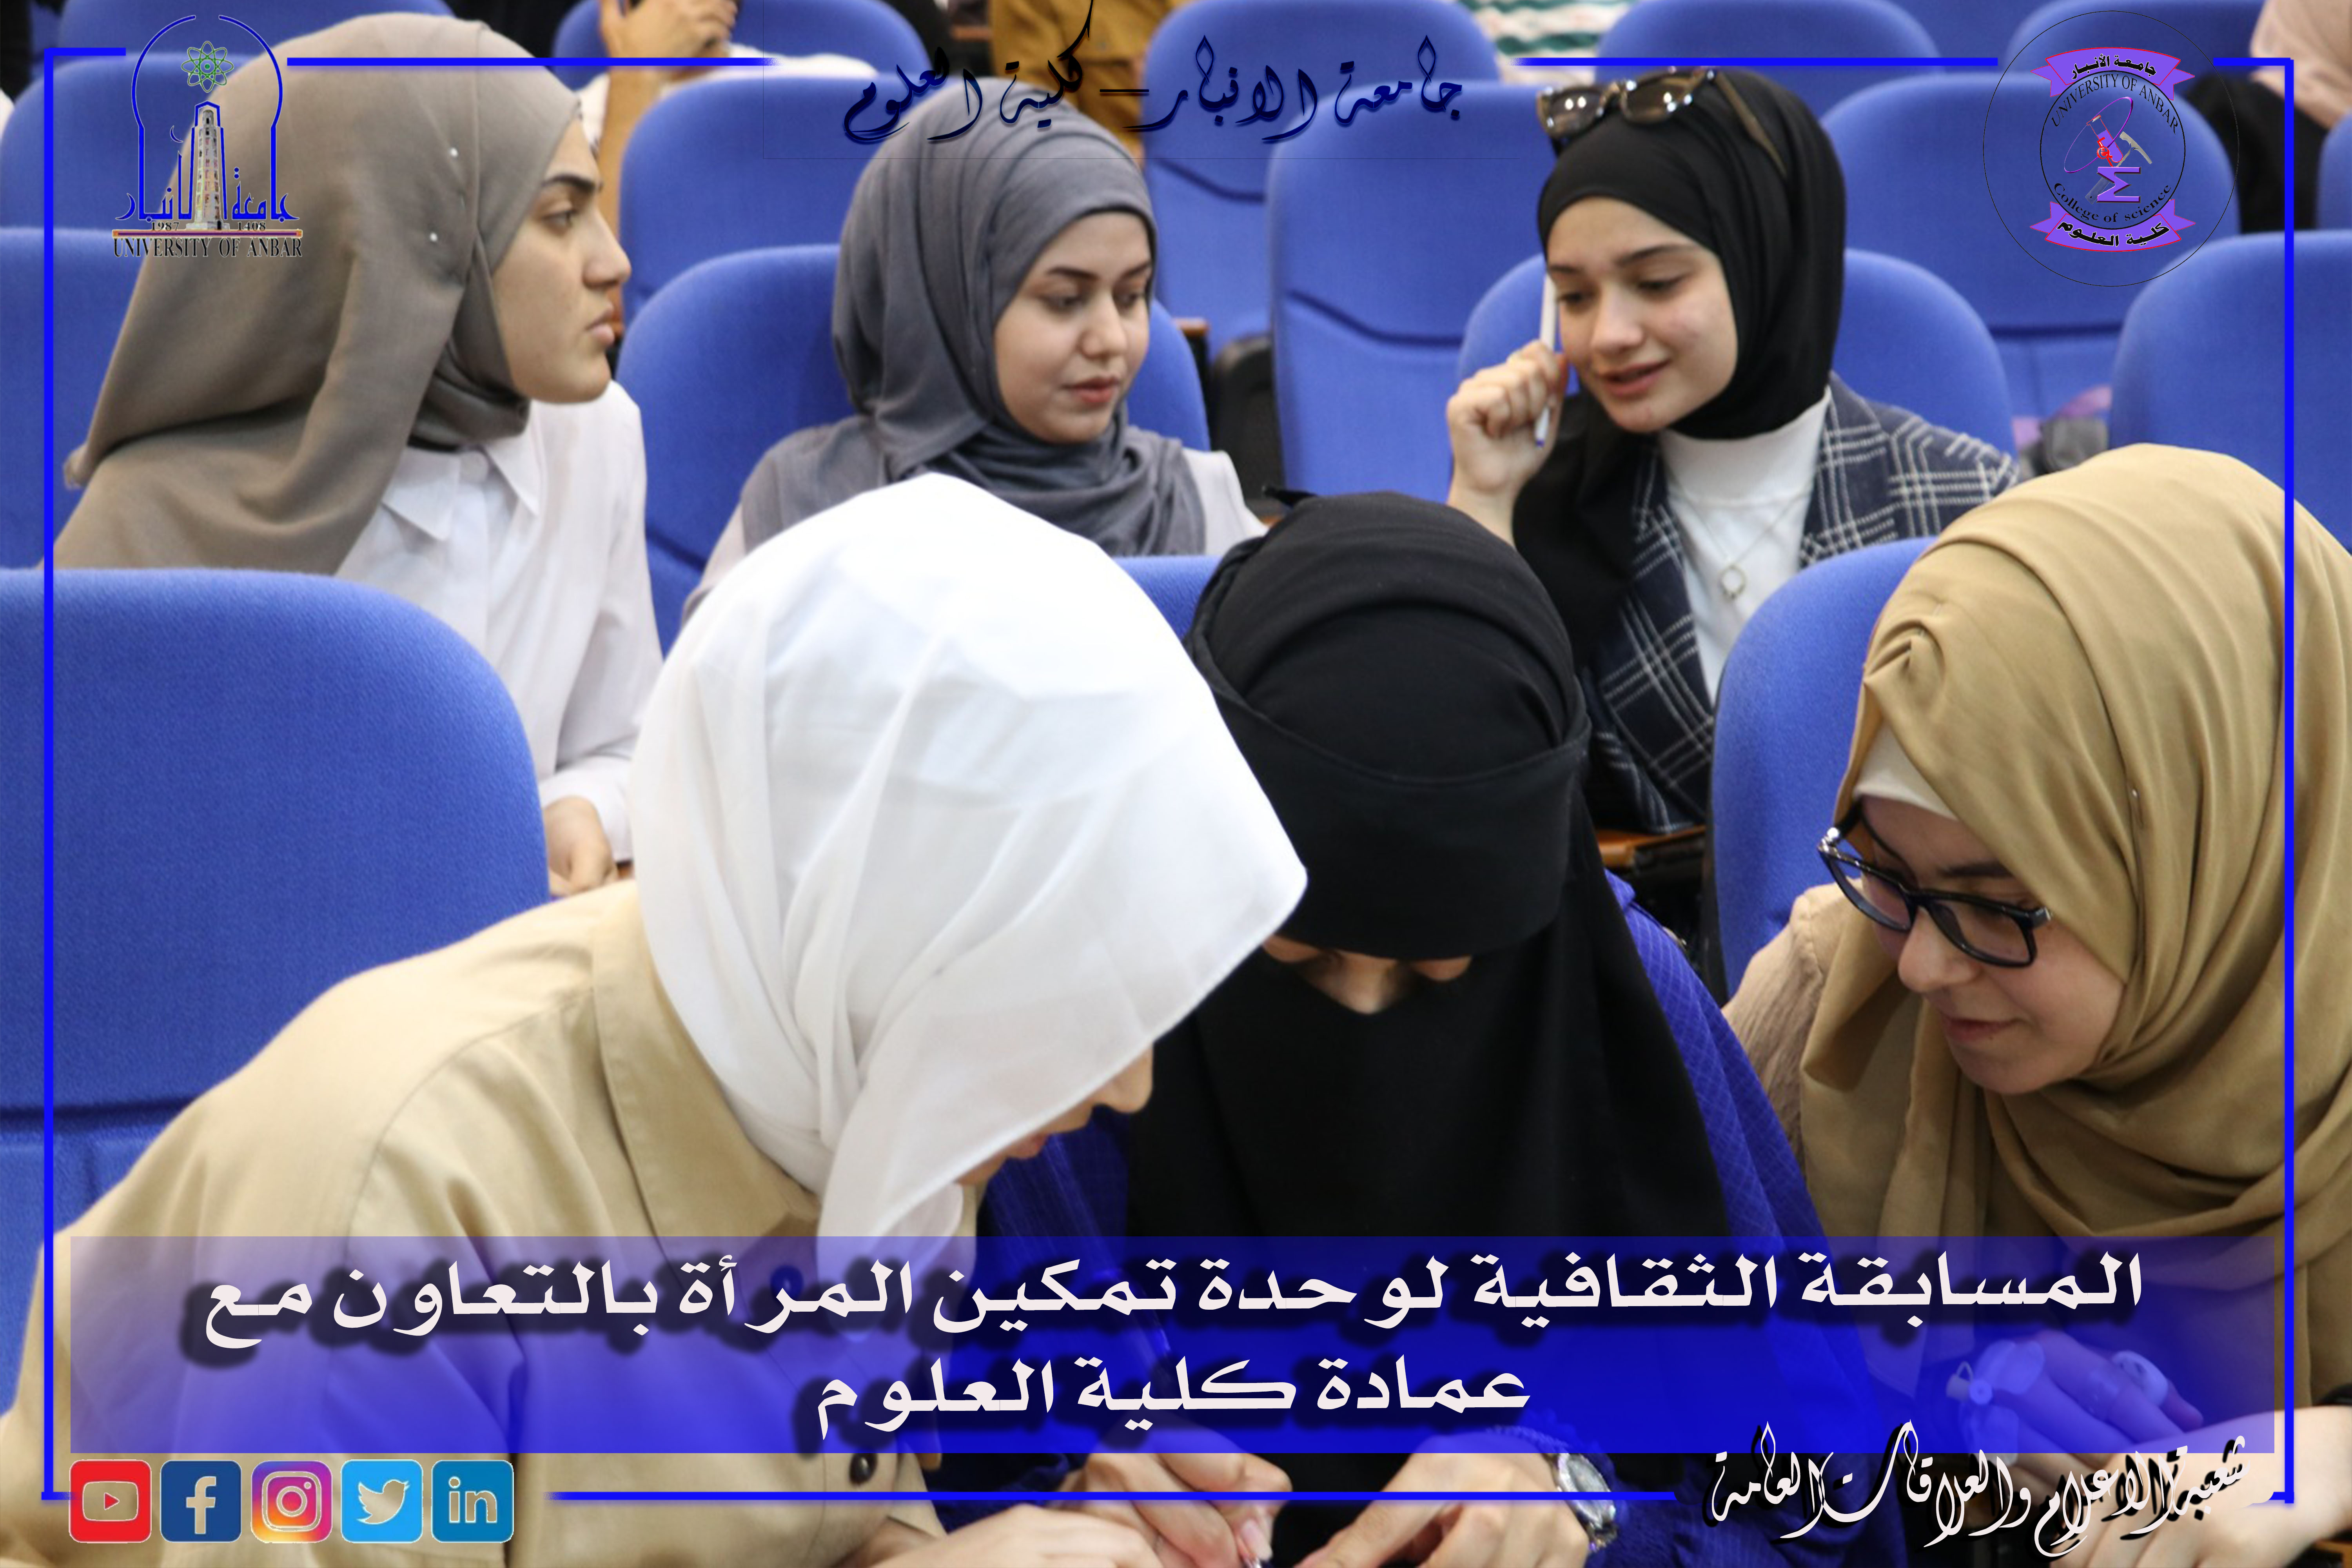 A scientific and cultural competition for the Women's Empowerment Unit